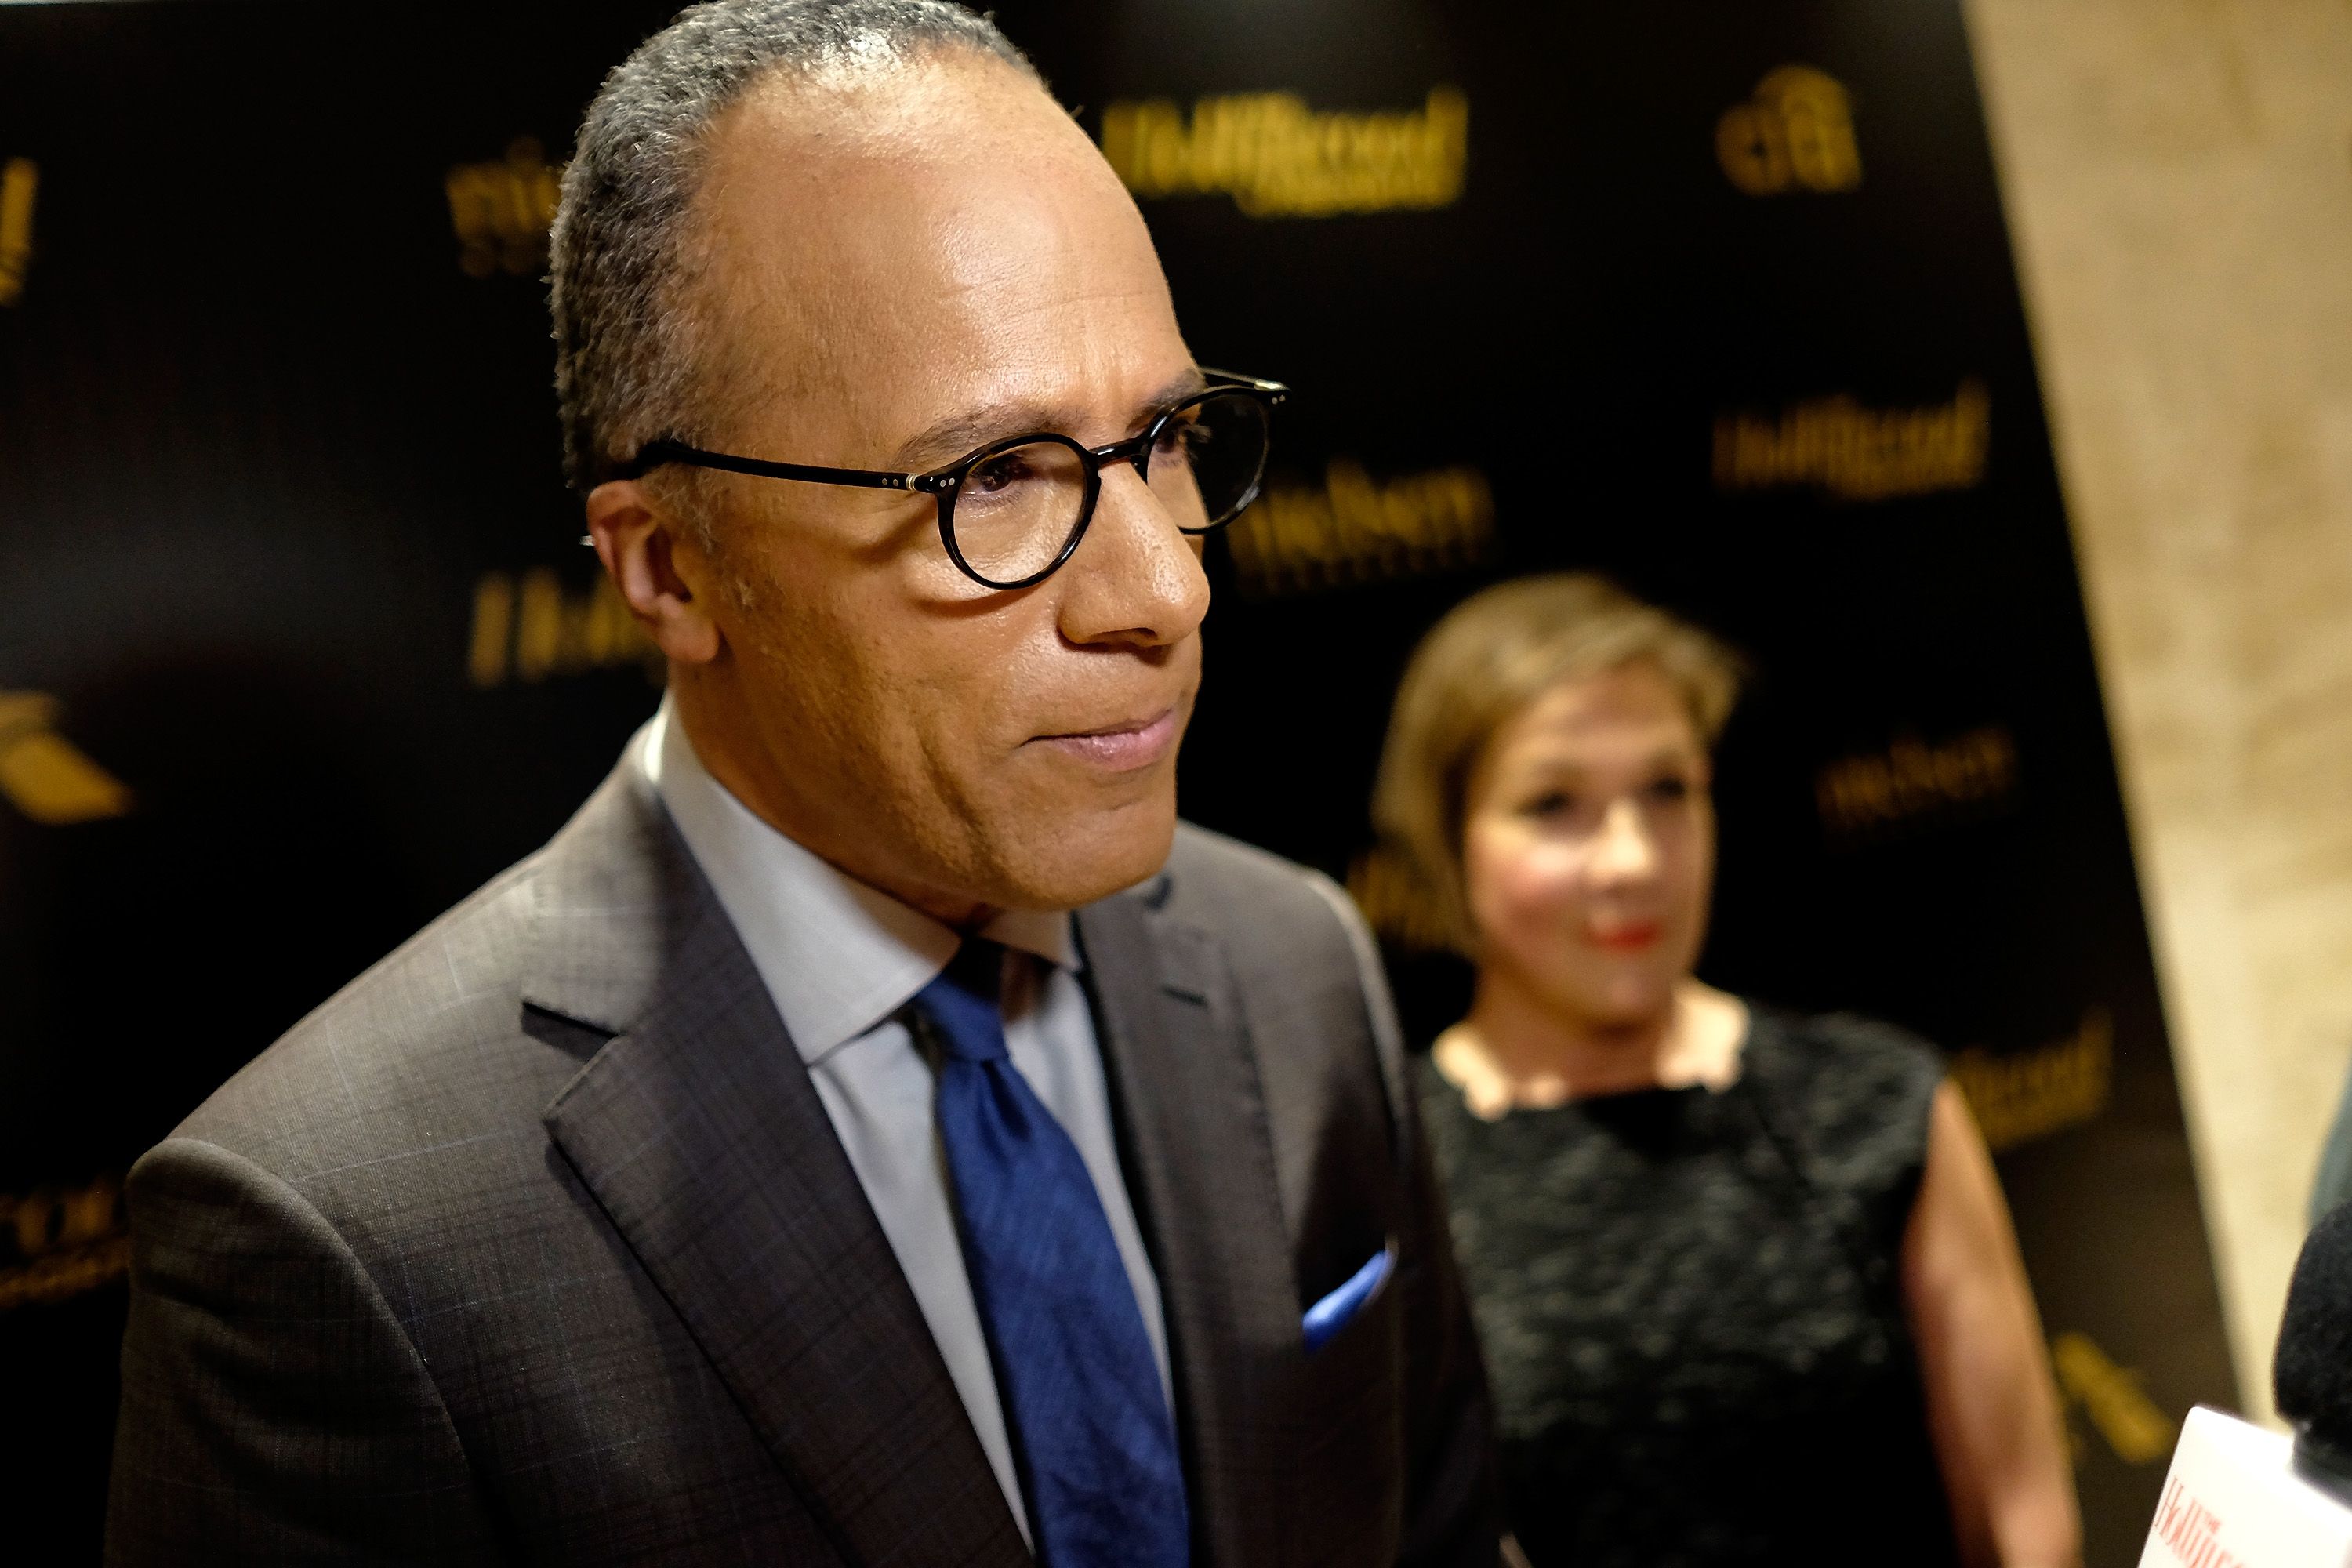 What is Lester Holt's Yearly Salary & Net Worth?